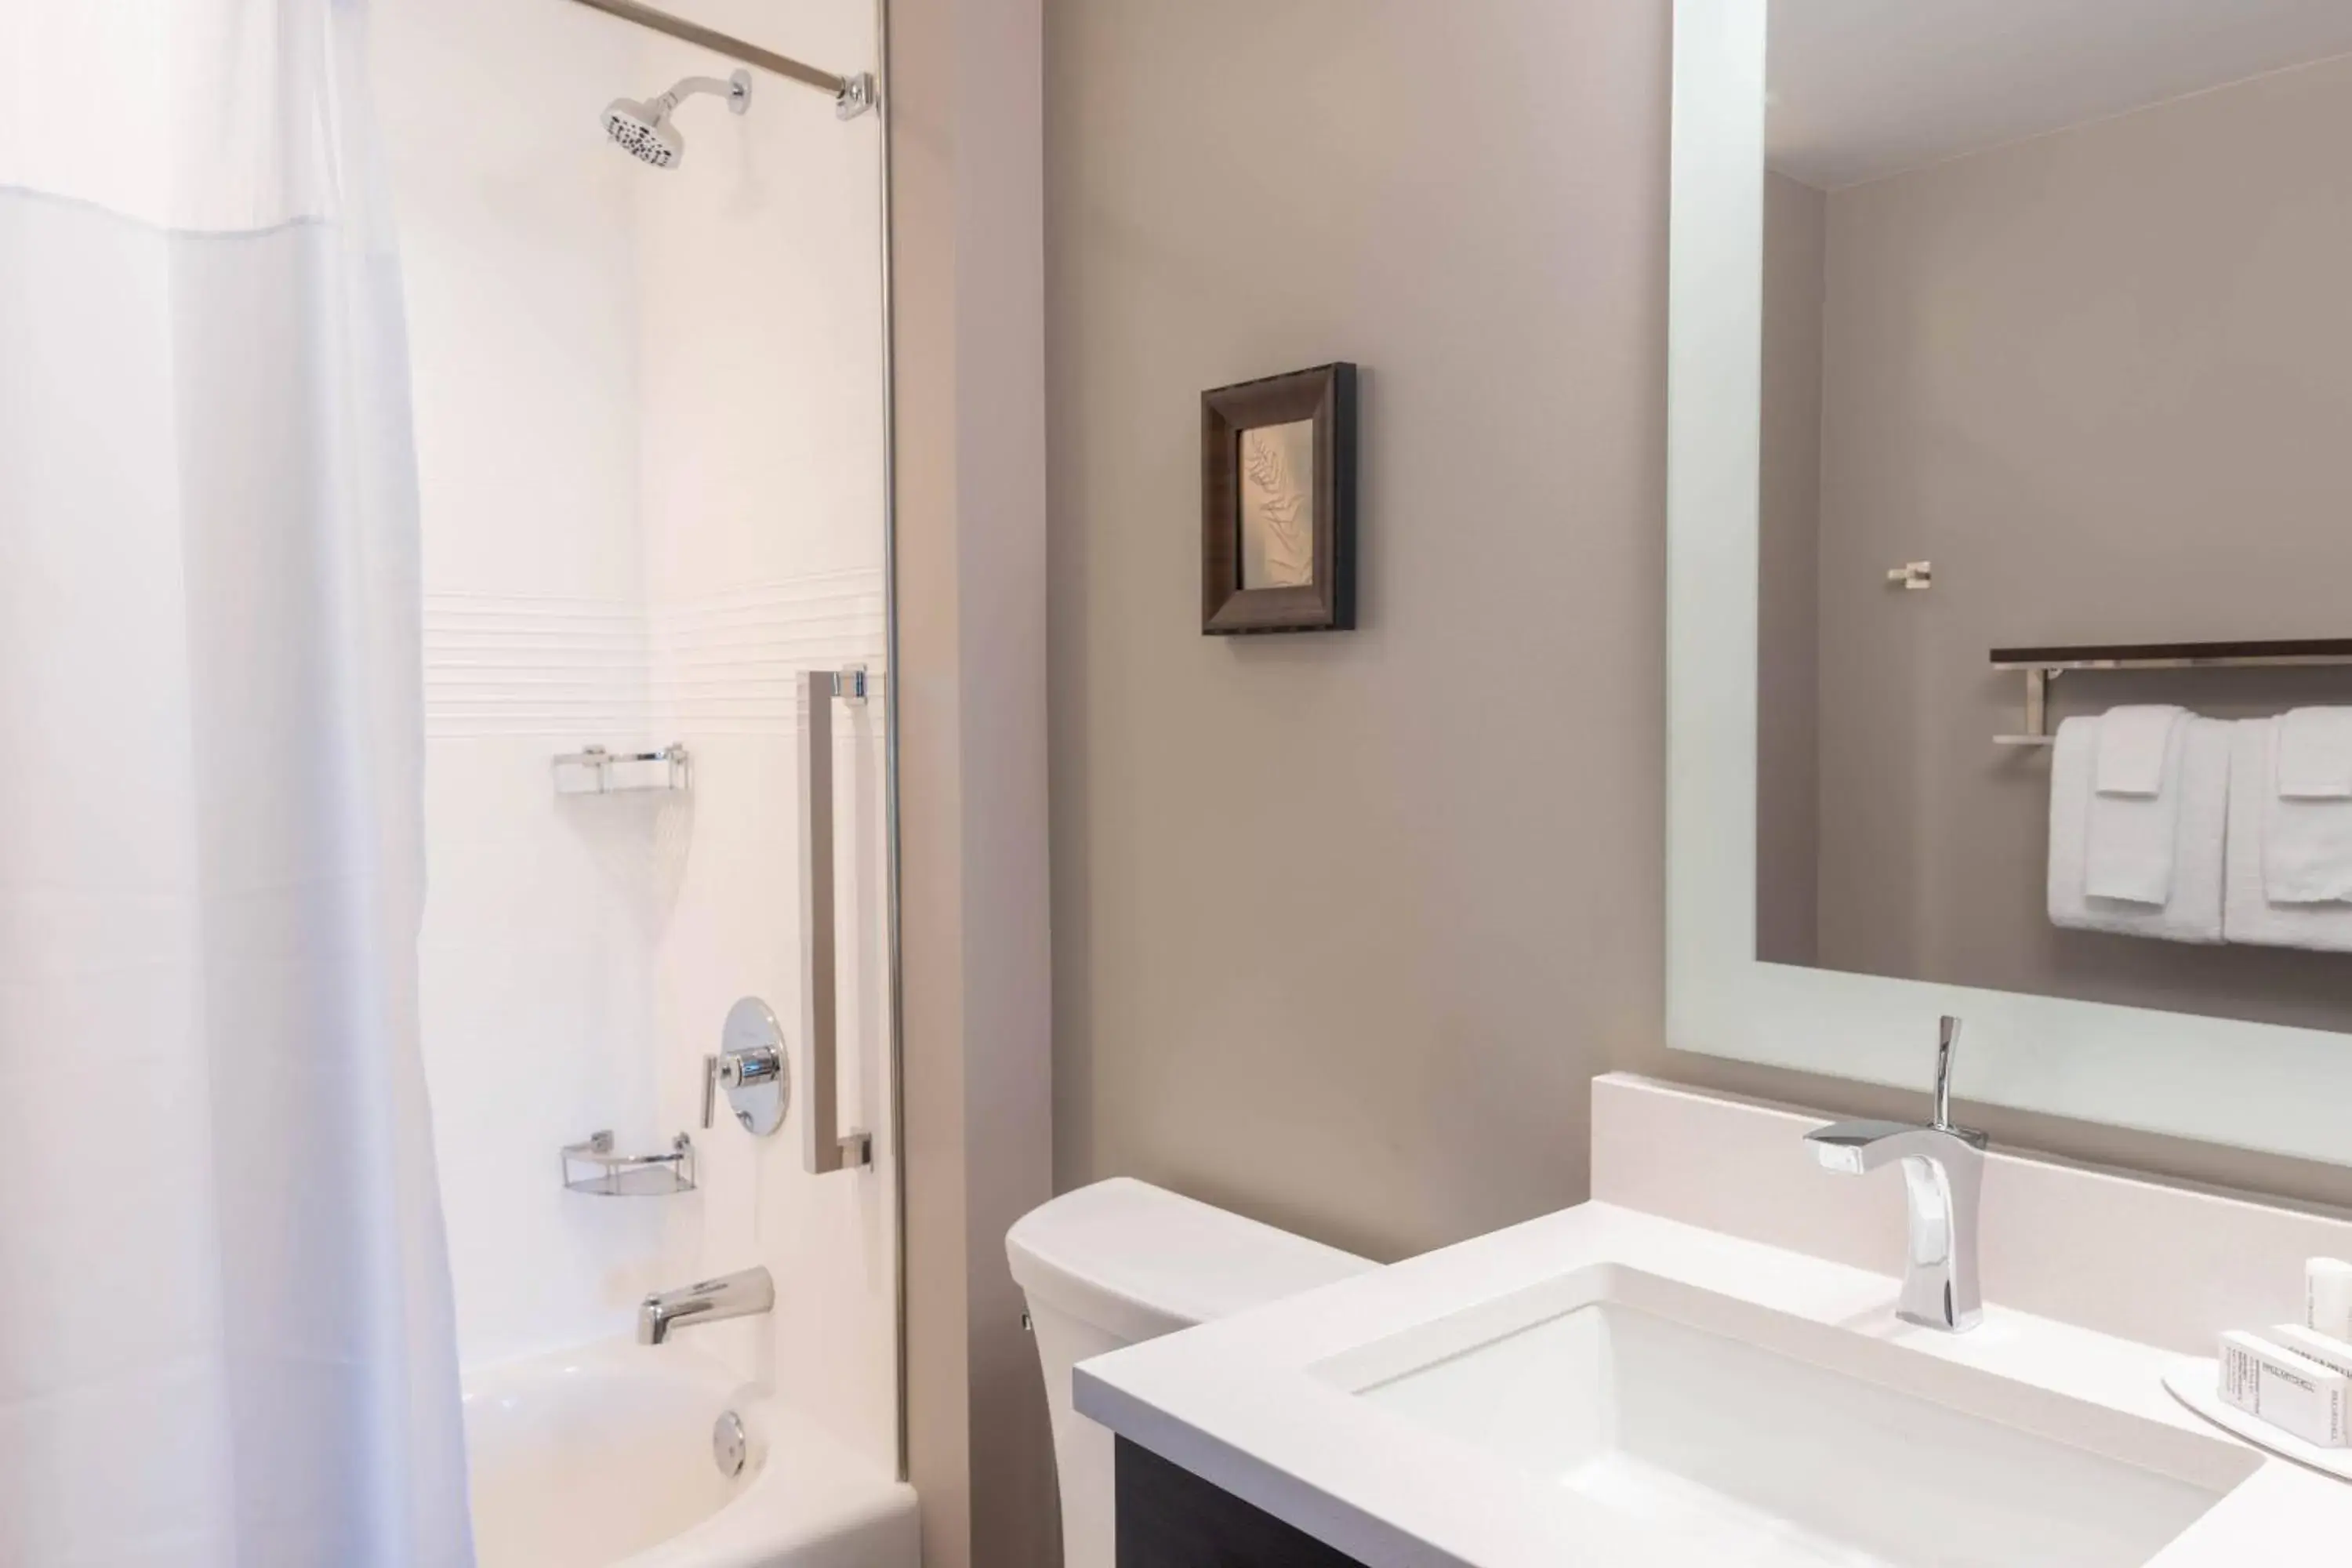 Bathroom in TownePlace Suites by Marriott Thousand Oaks Agoura Hills